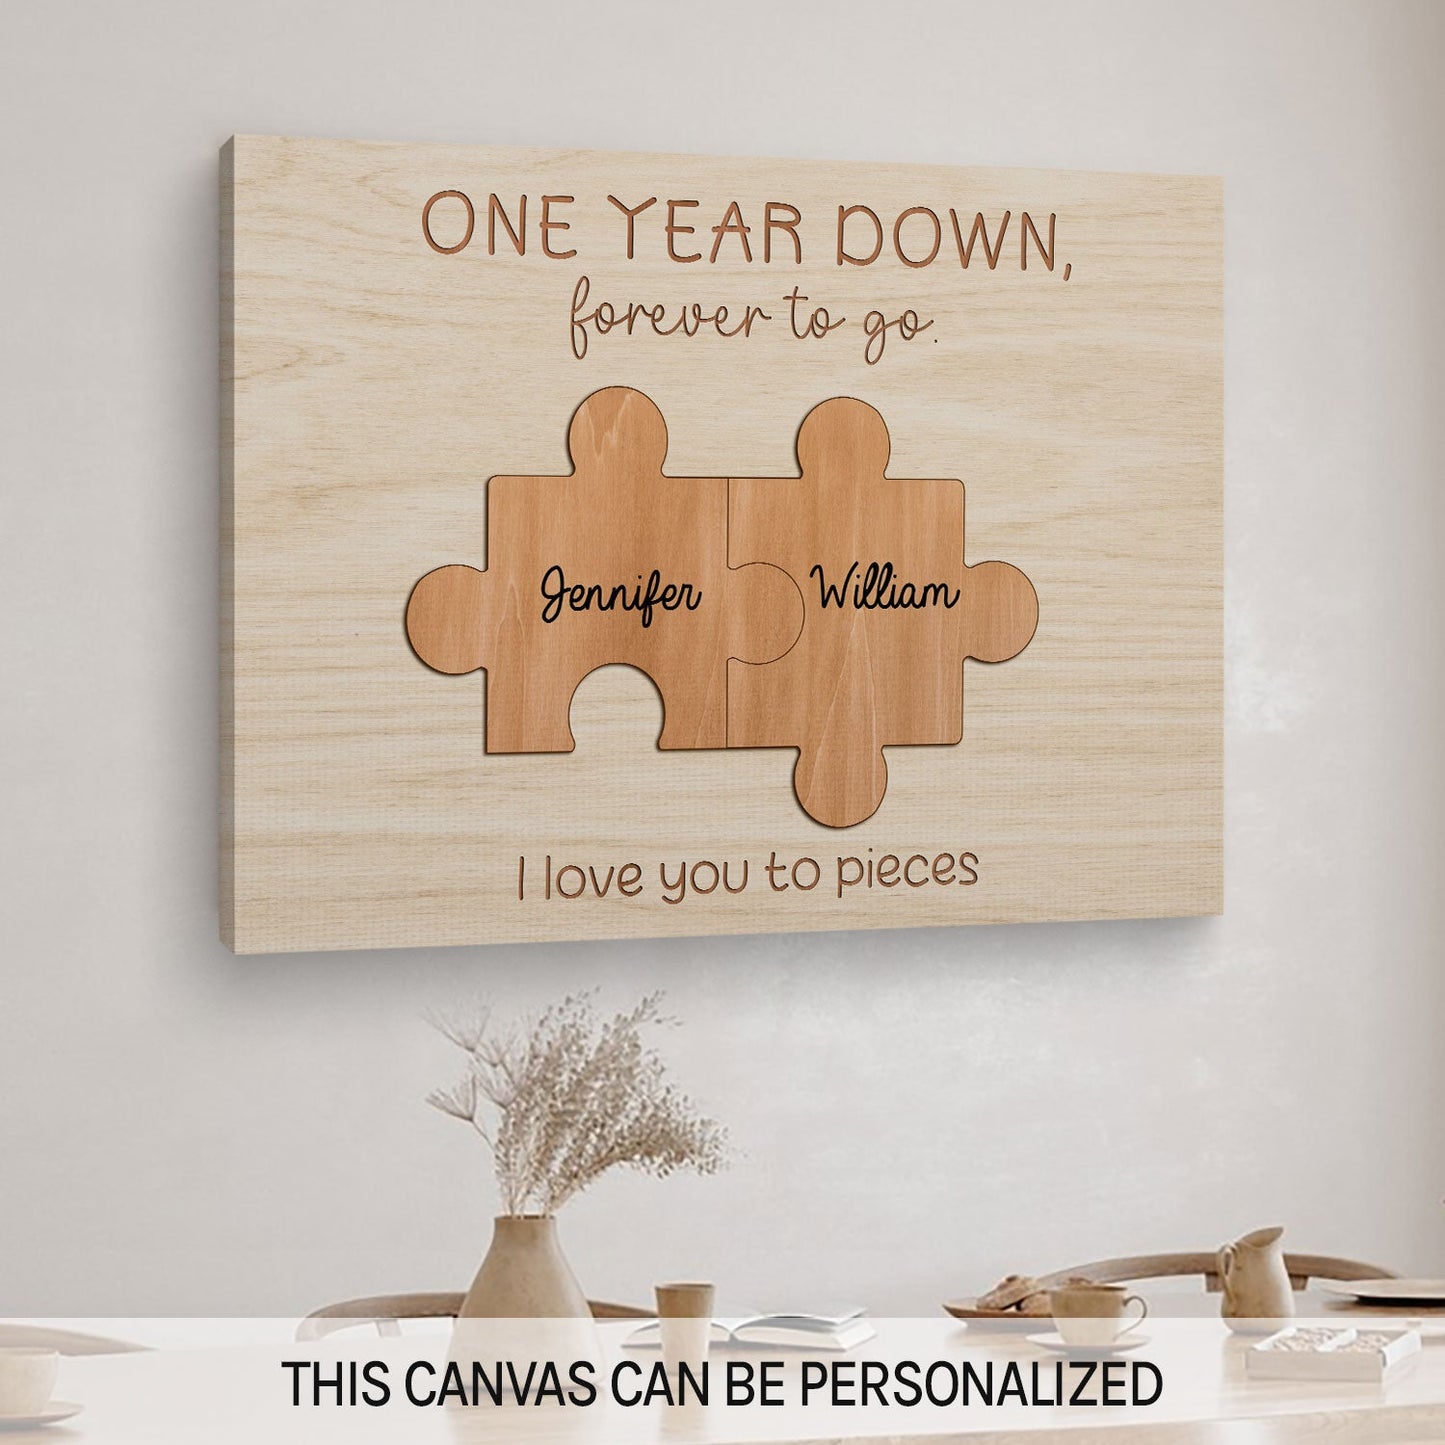 One Year Down, Forever To Go - Personalized 1 Year Anniversary gift For Husband or Wife - Custom Canvas Print - MyMindfulGifts